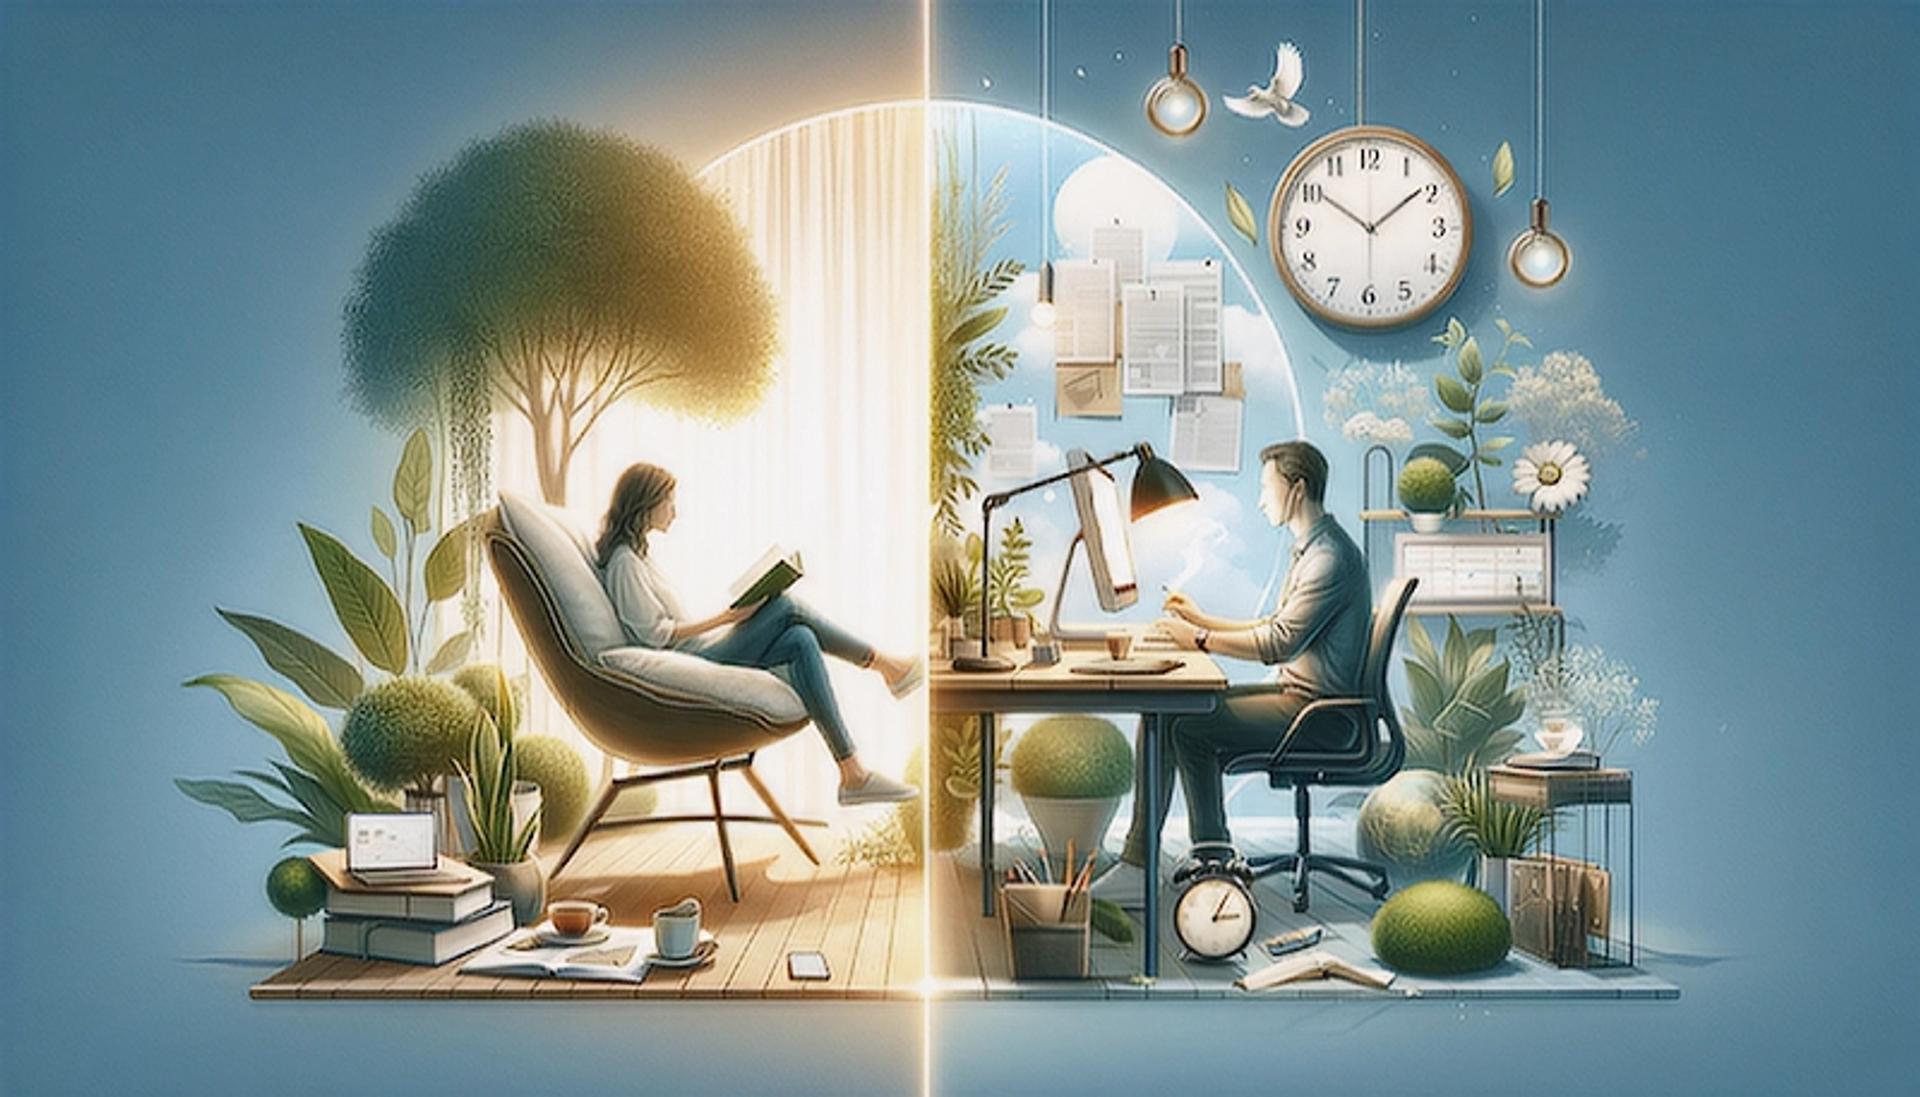 Wide-format image depicting work-life balance: Left side shows a relaxed home setting with a person reading, and right side displays a professional office scene with a person working at a desk.